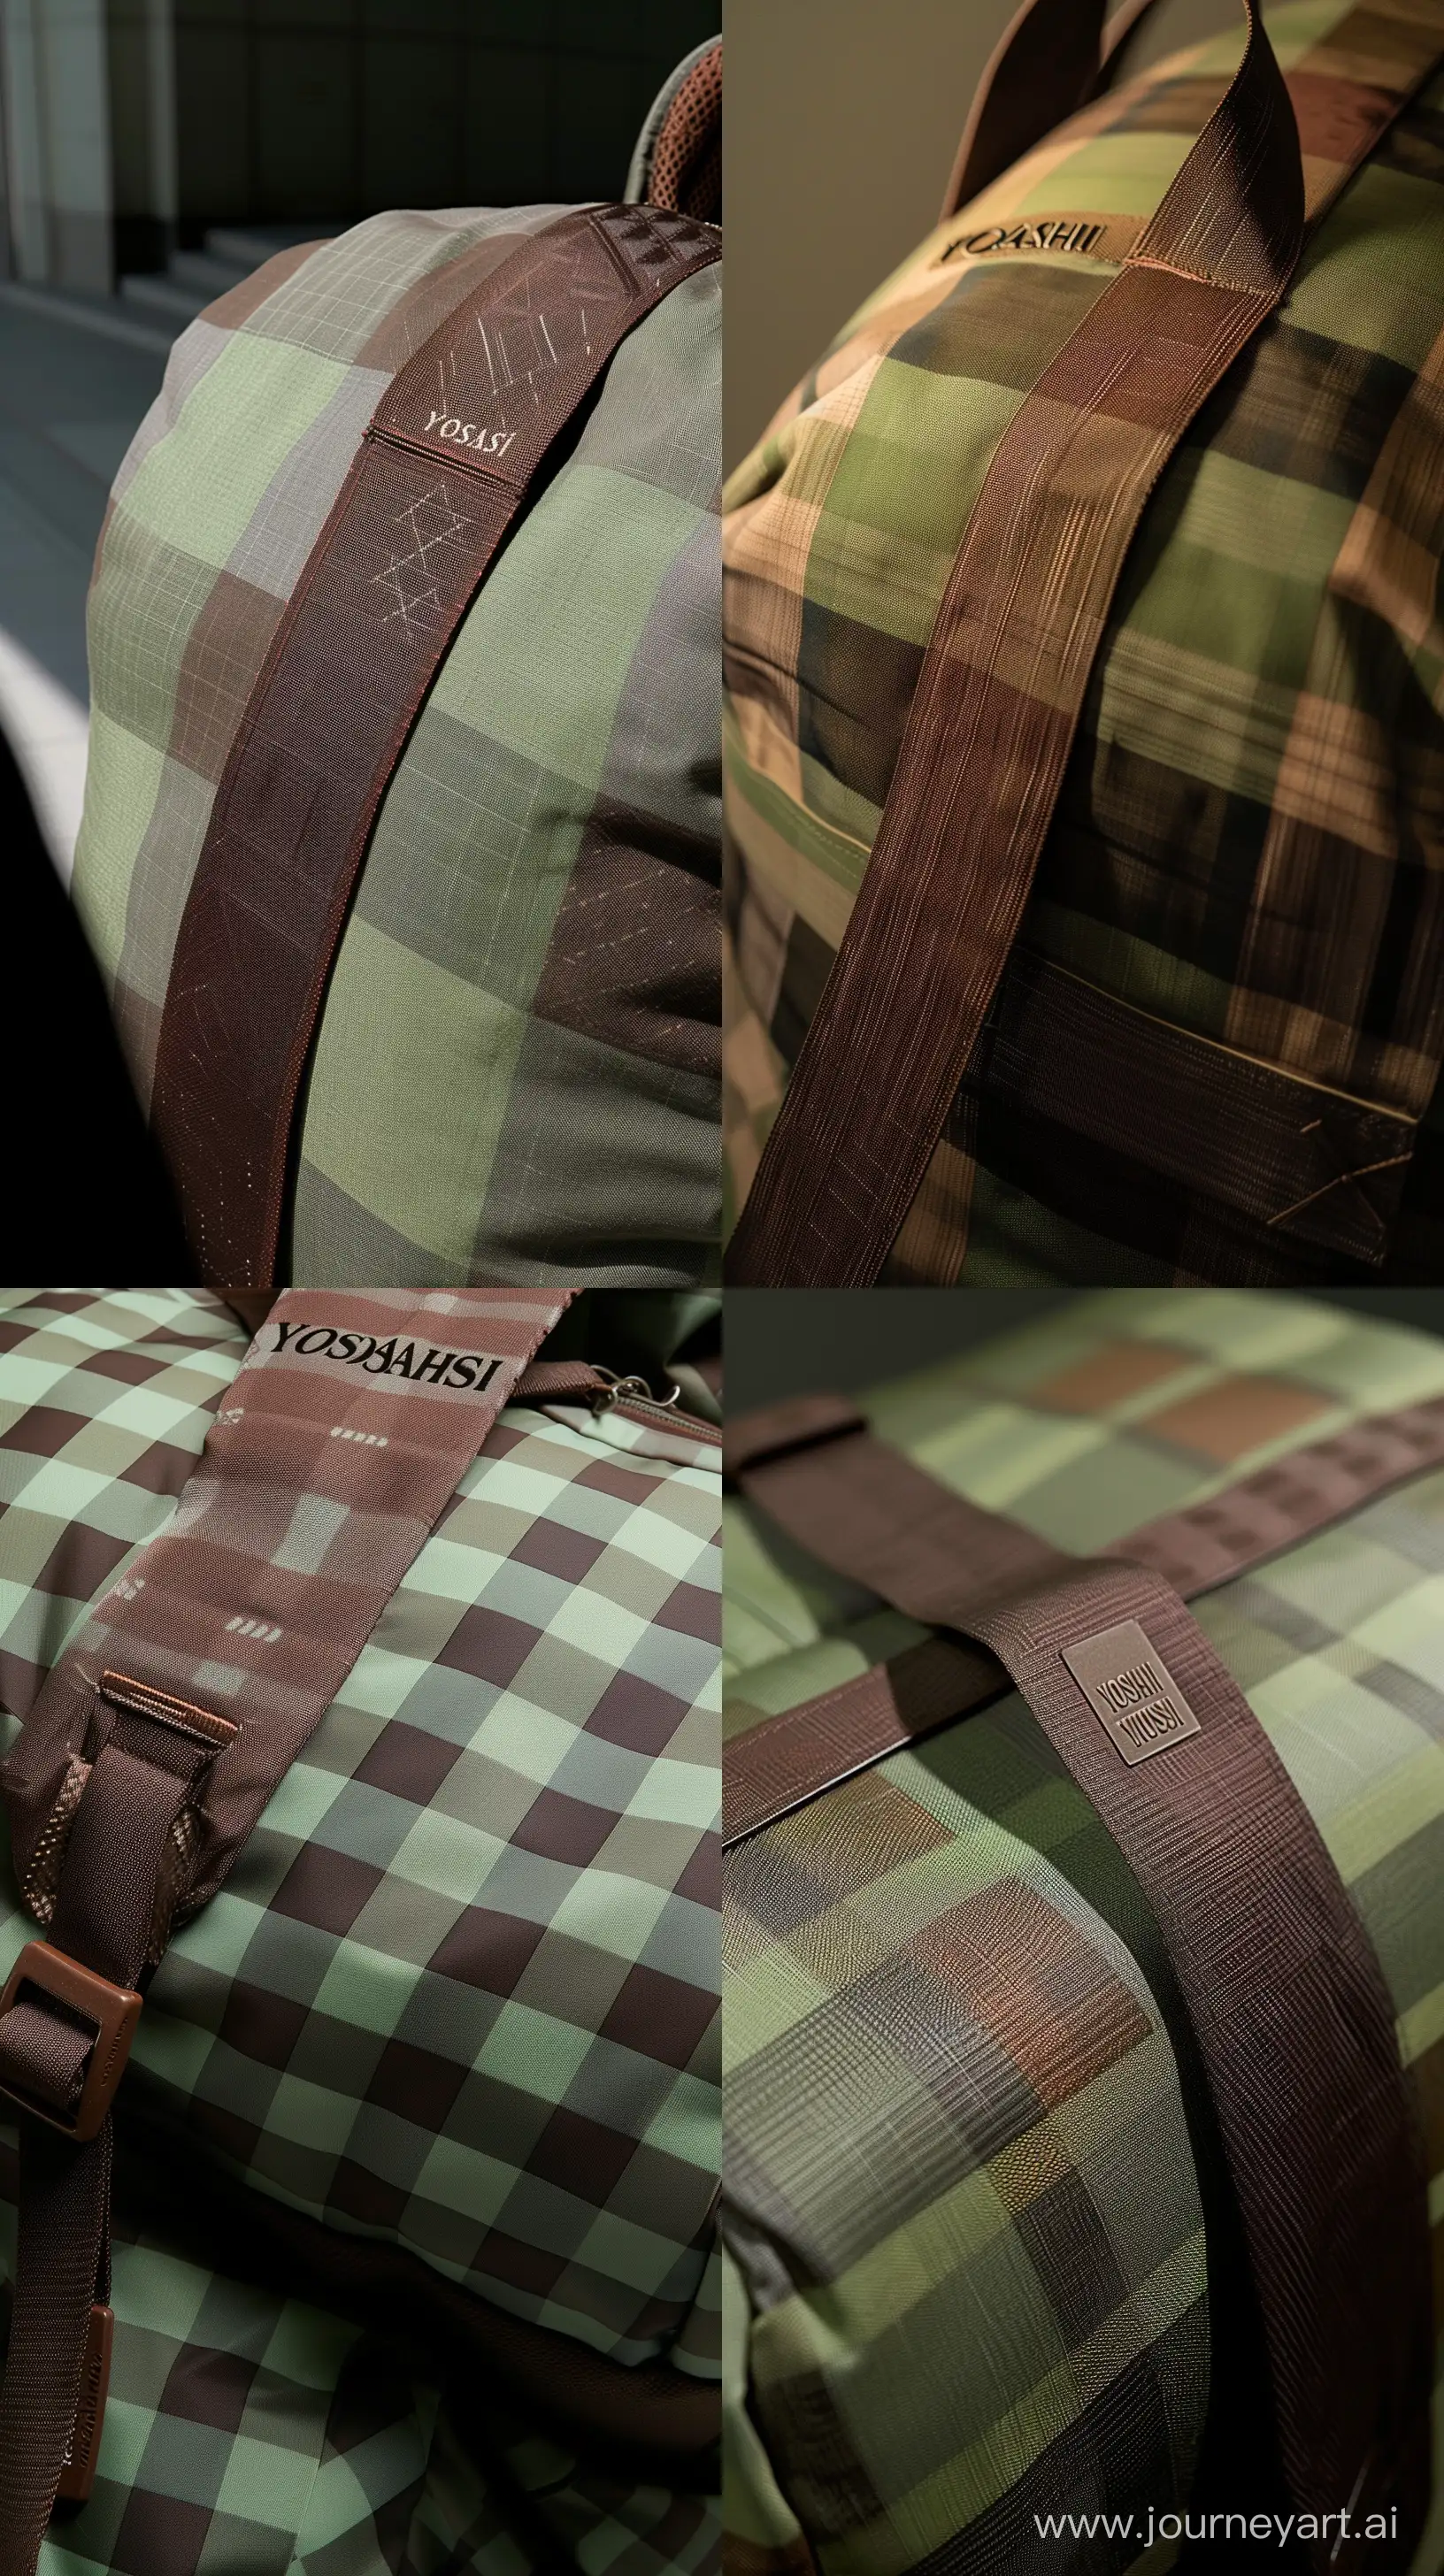 Product photography. Close-up of a The image features a large, green and brown checked backpack with a brown strap. The backpack has a unique design, with a checkered pattern on its surface. It appears to be a stylish and practical choice for carrying belongings. The backpack is positioned in the foreground of the image, with the brown strap clearly visible. With text "YOSASHI" It is placed at the top of the bag and engraved in it, which causes spacing and shadow --ar 9:16 --s 0 --style raw --v 6 